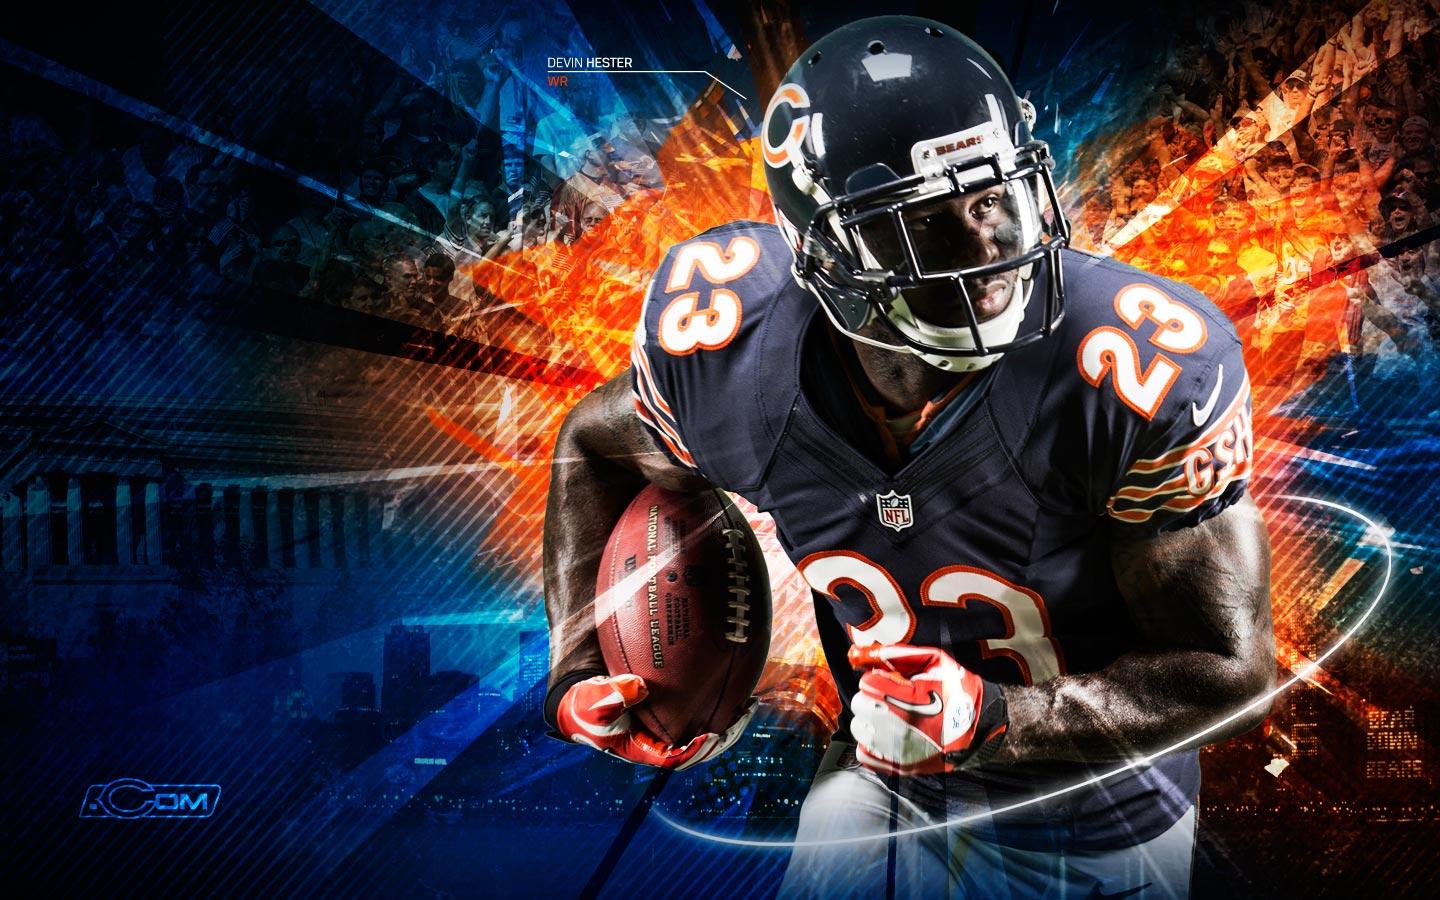 Free download Chicago Bears Nfl Player Wallpaper 1440x900 iWallHD Wallpaper HD [1440x900] for your Desktop, Mobile & Tablet. Explore NFL Football Players Wallpaper. Free NFL Wallpaper, NFL